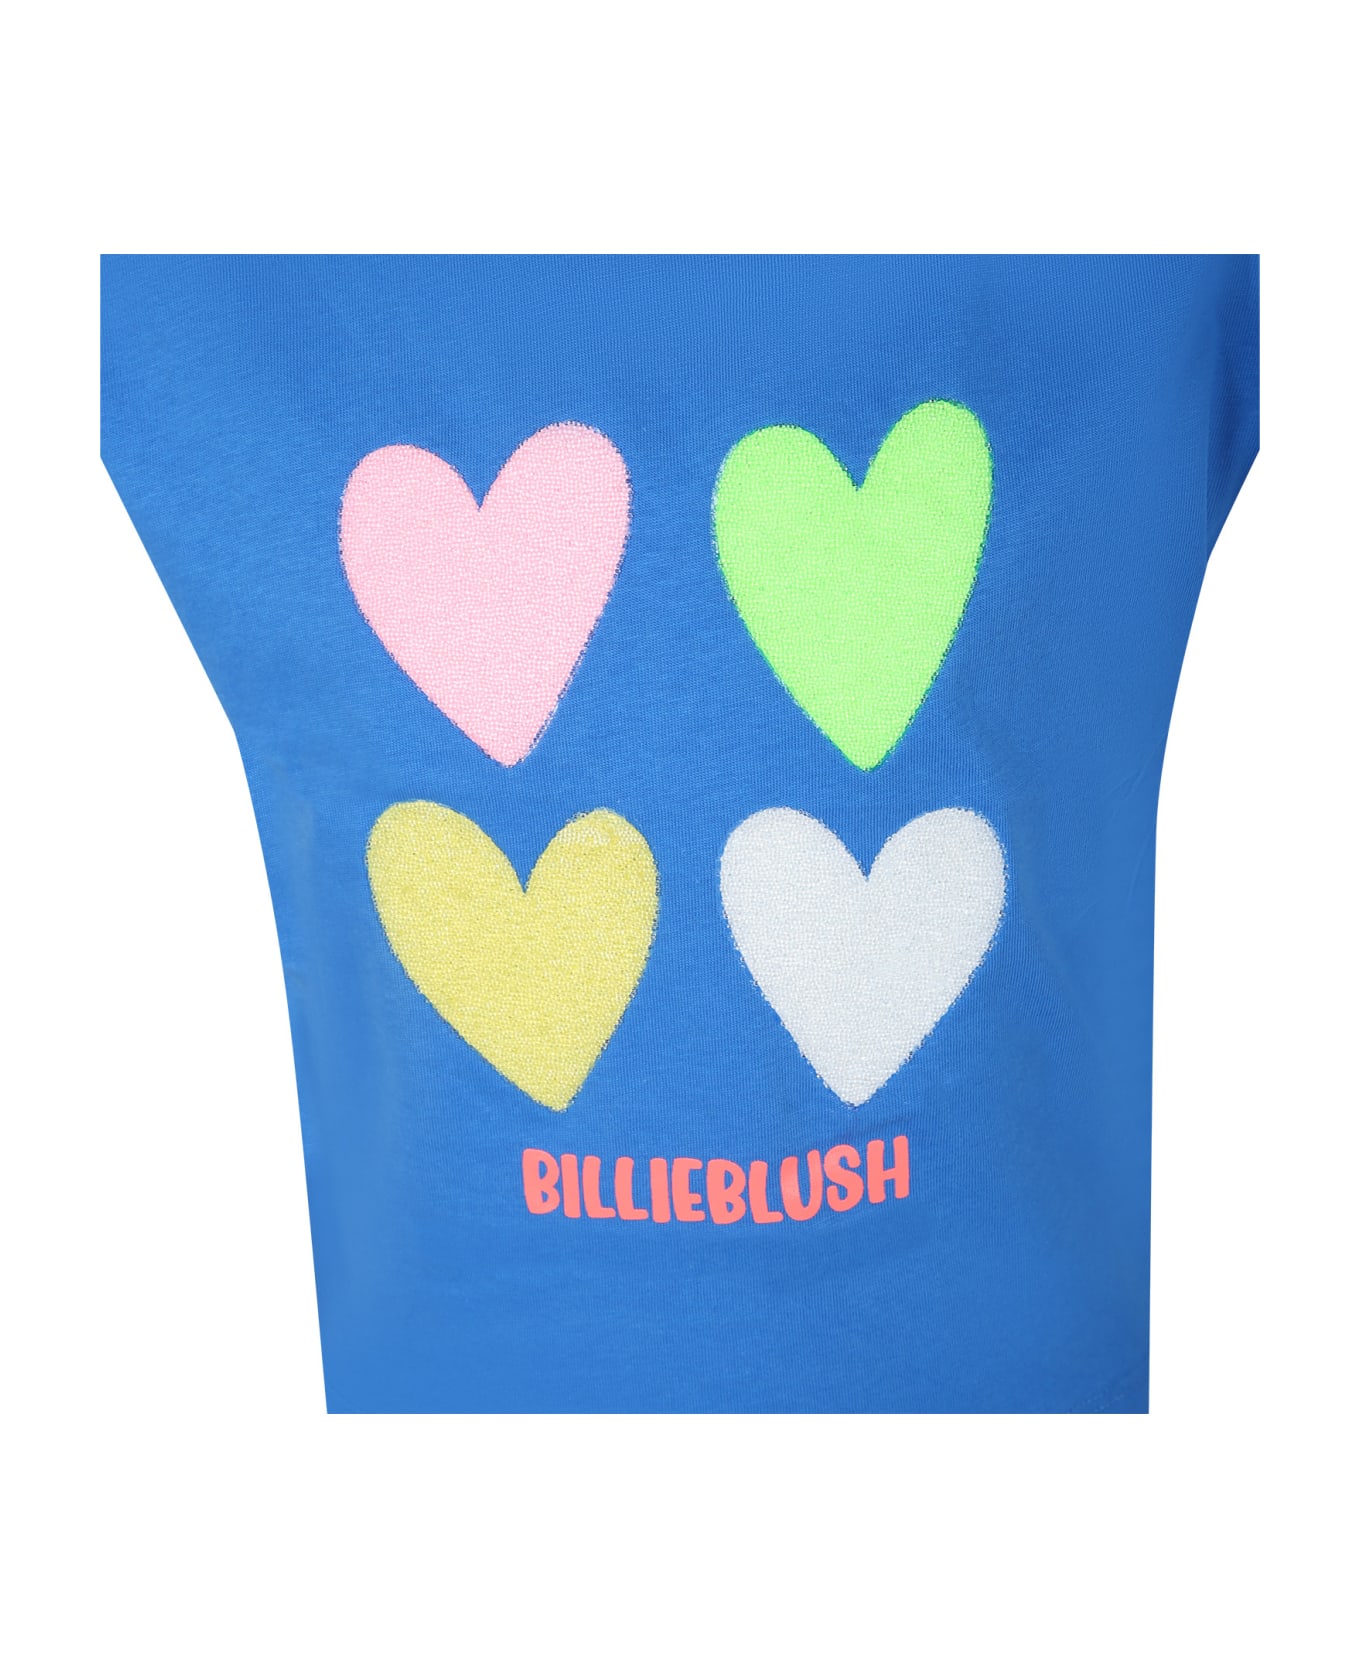 Billieblush Light Blue T-shirt With Multicolor Hearts And Logo - Light Blue Tシャツ＆ポロシャツ